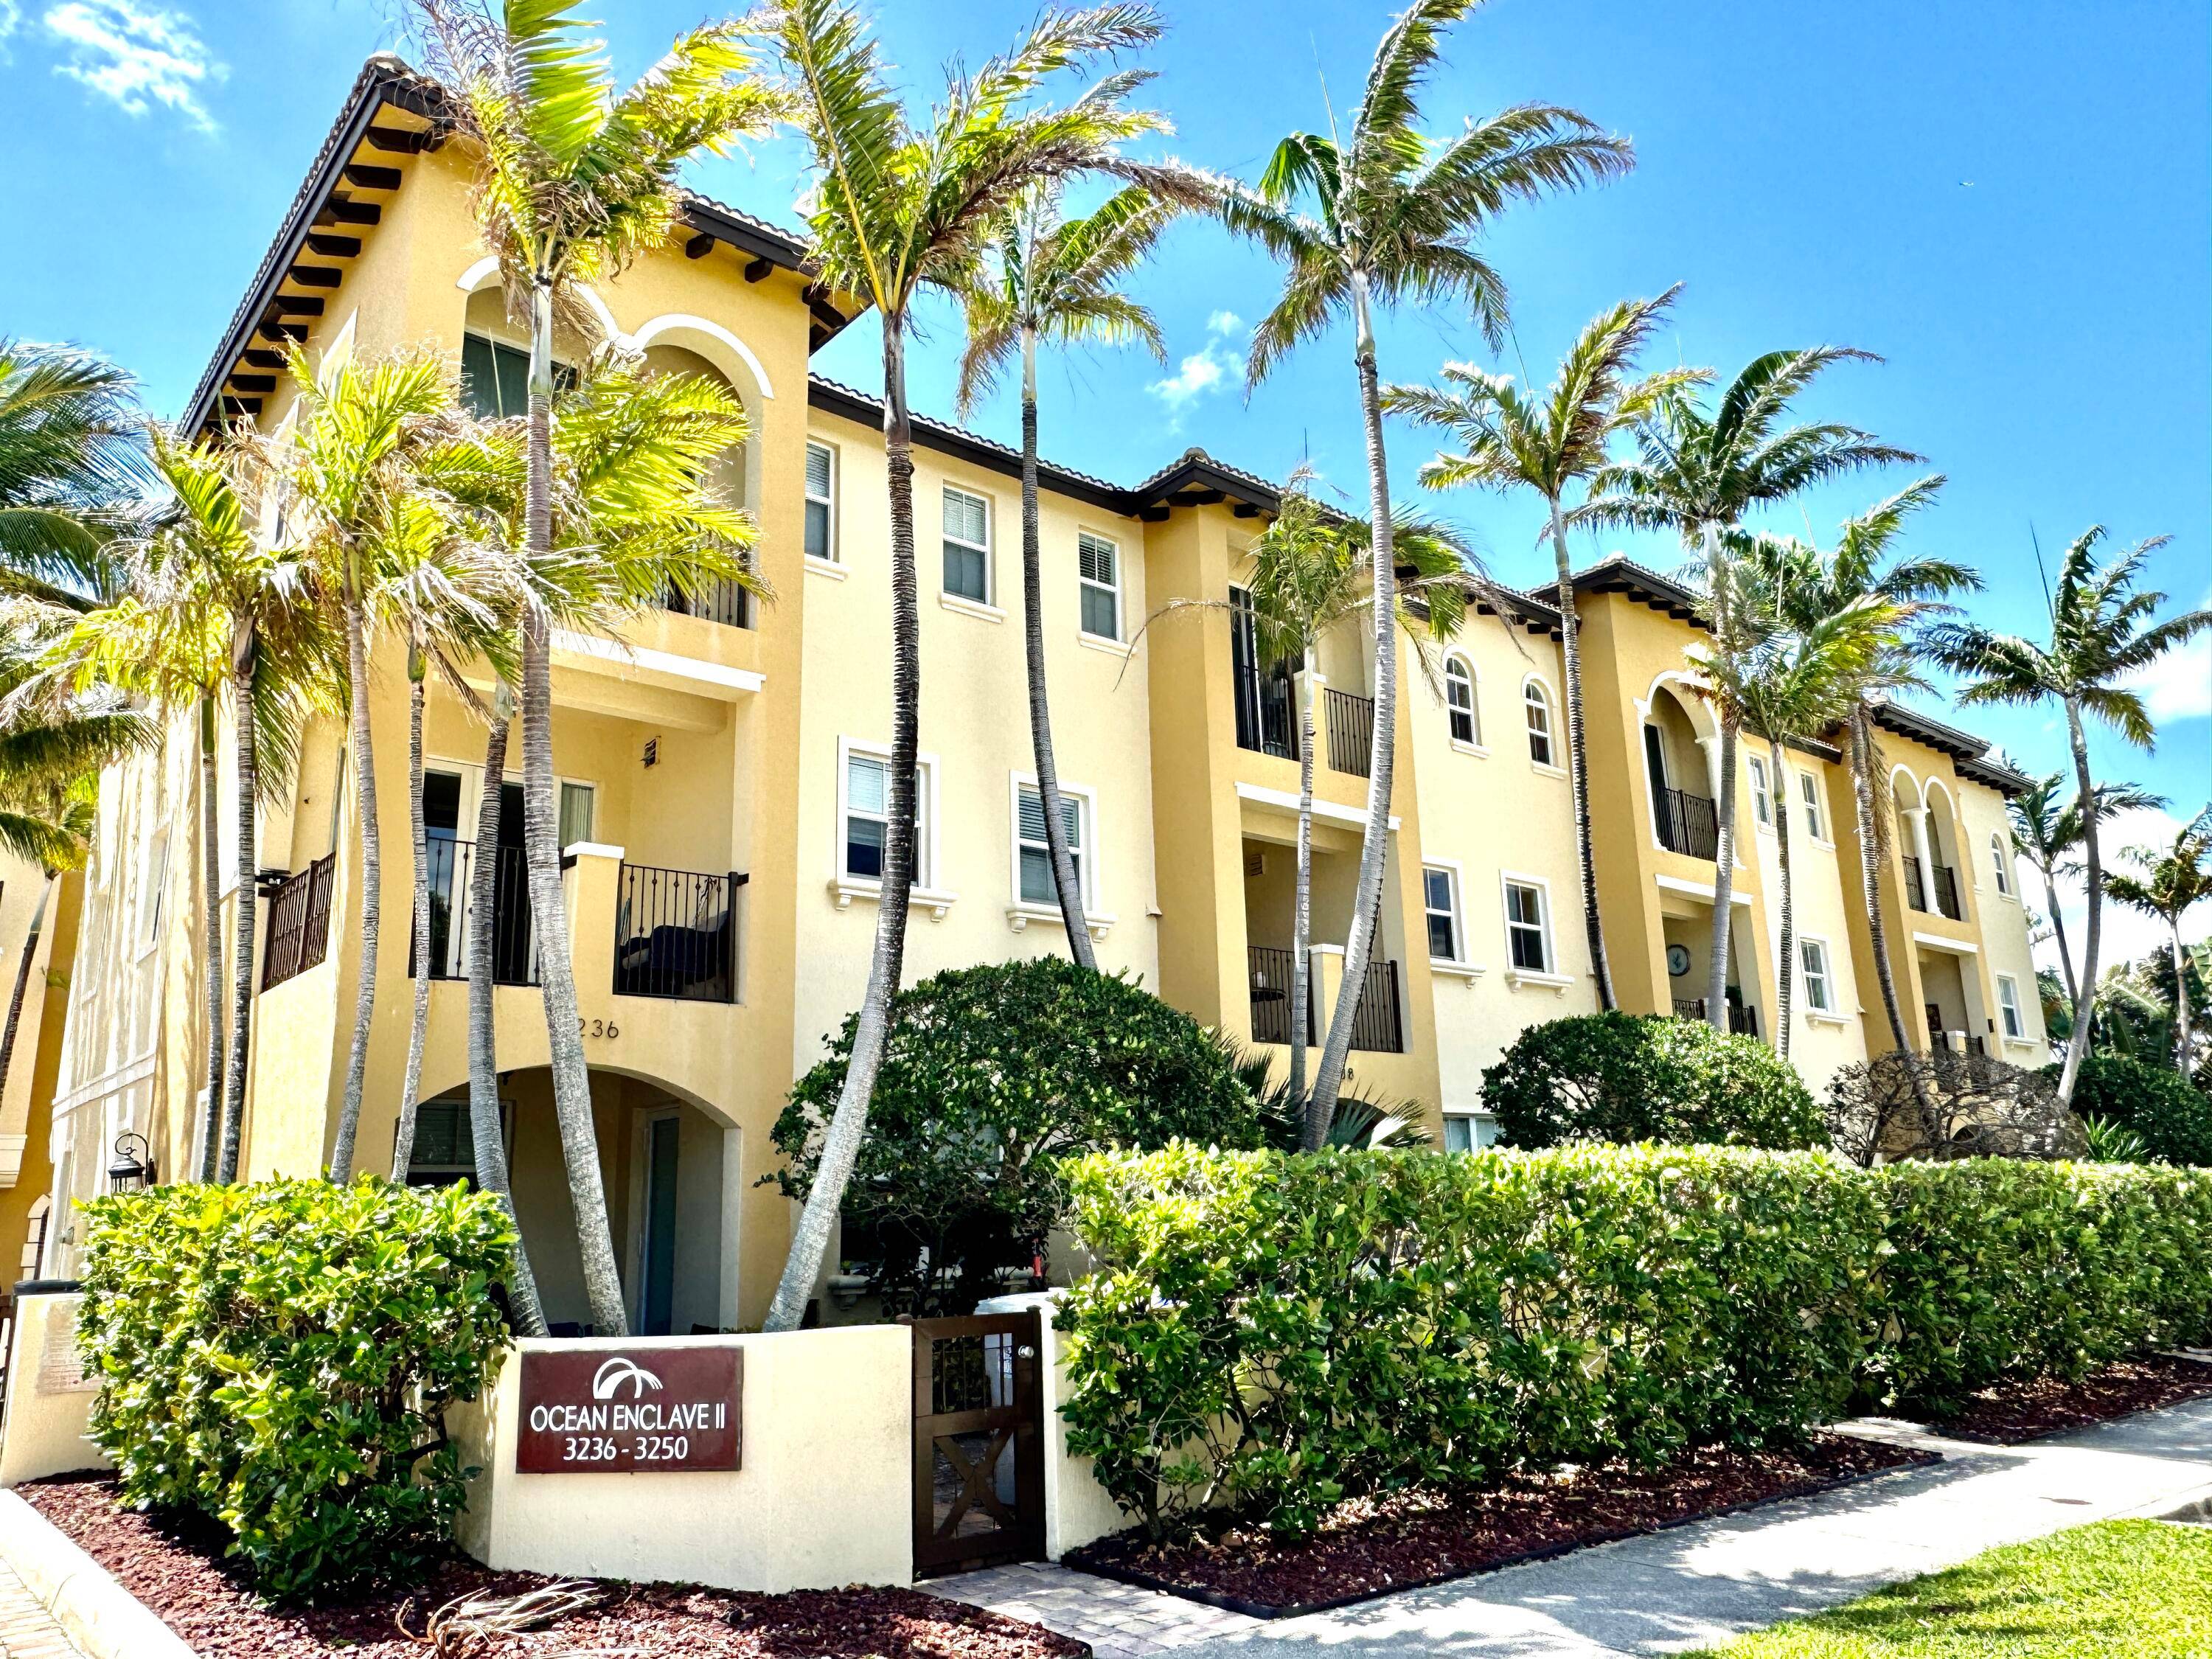 Enjoy coastal luxury in the boutique townhome community of Ocean Enclave II, between the Intracoastal and Atlantic Ocean in Pompano Beach.